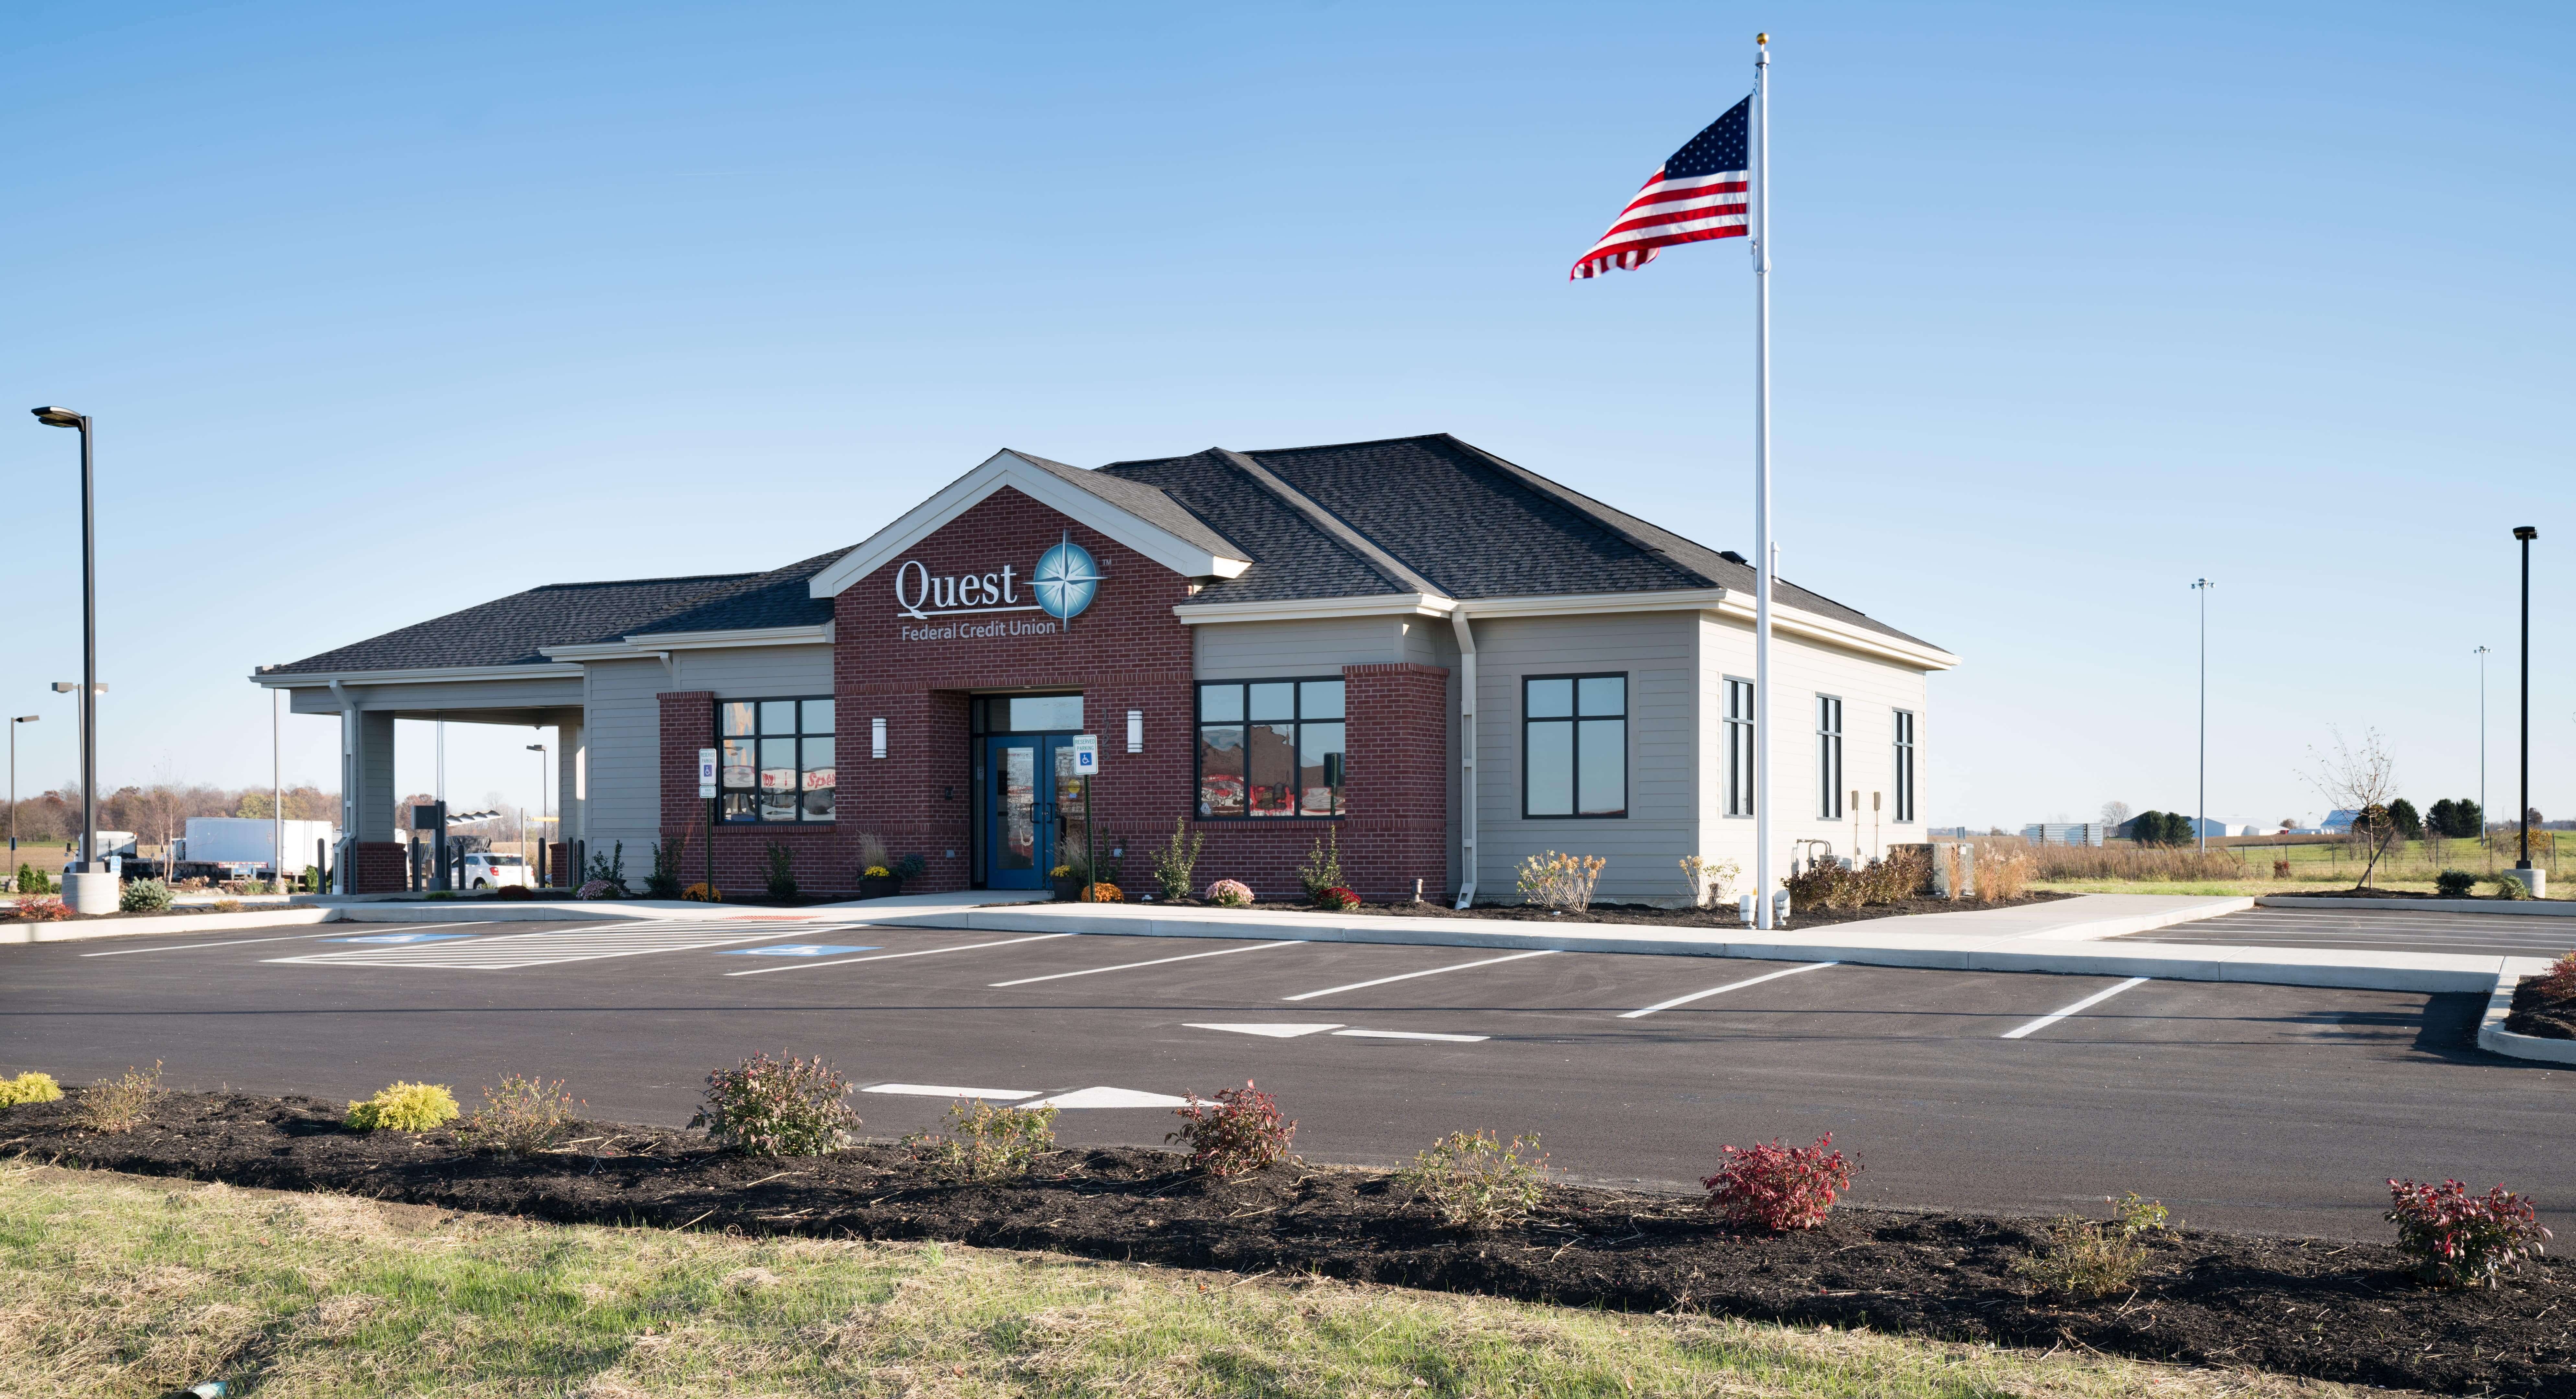 New credit union branch built in Ohio